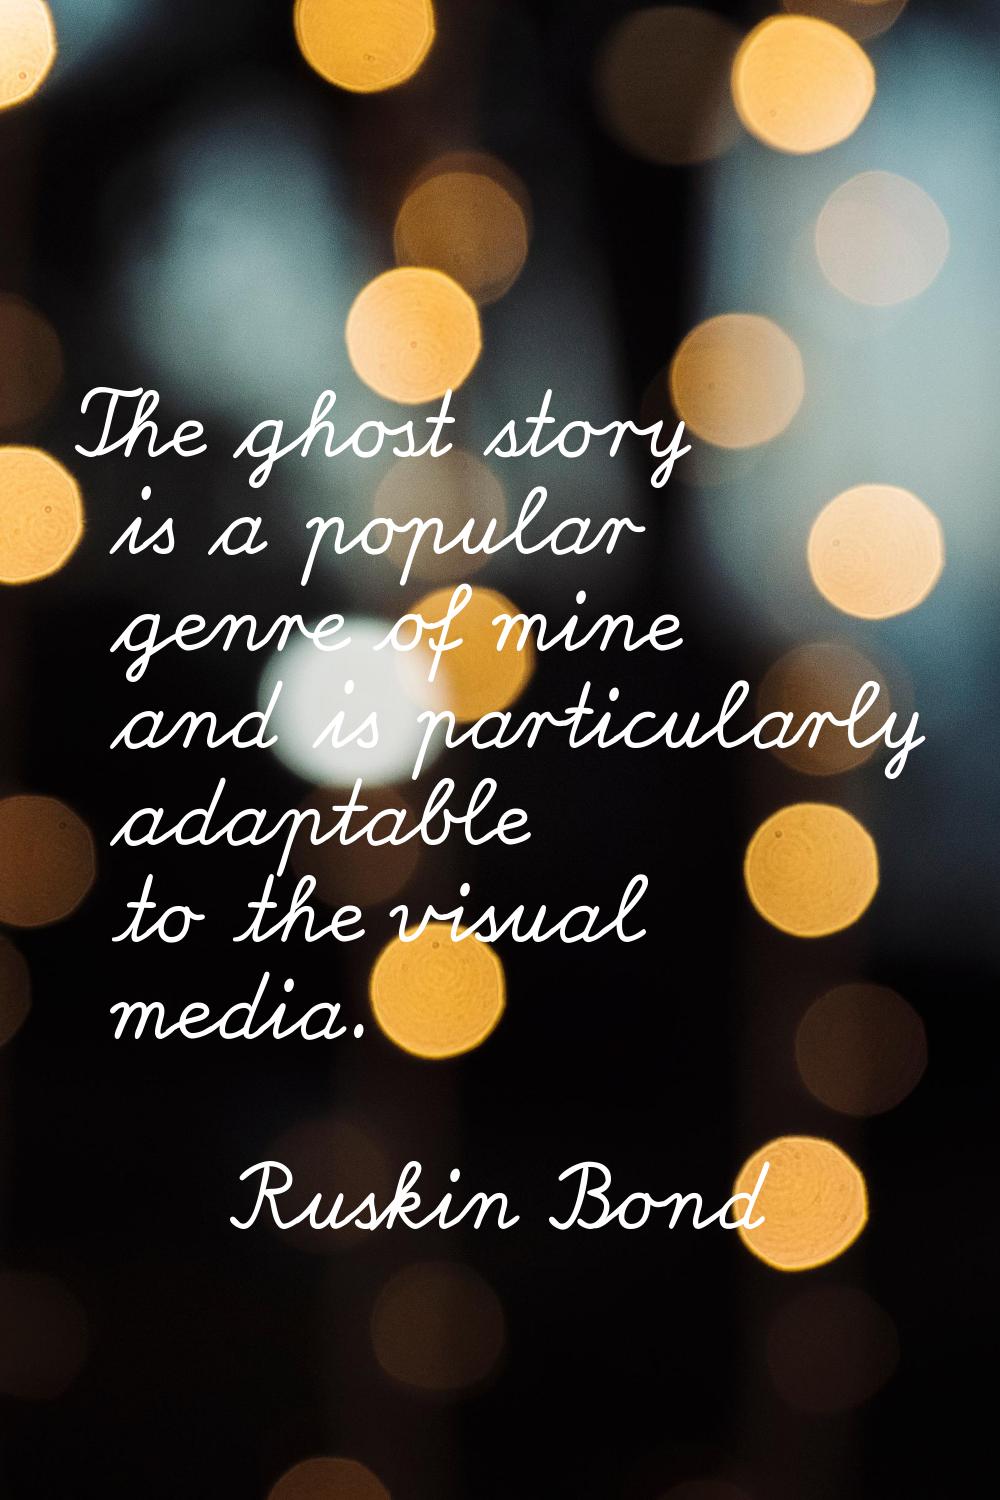 The ghost story is a popular genre of mine and is particularly adaptable to the visual media.